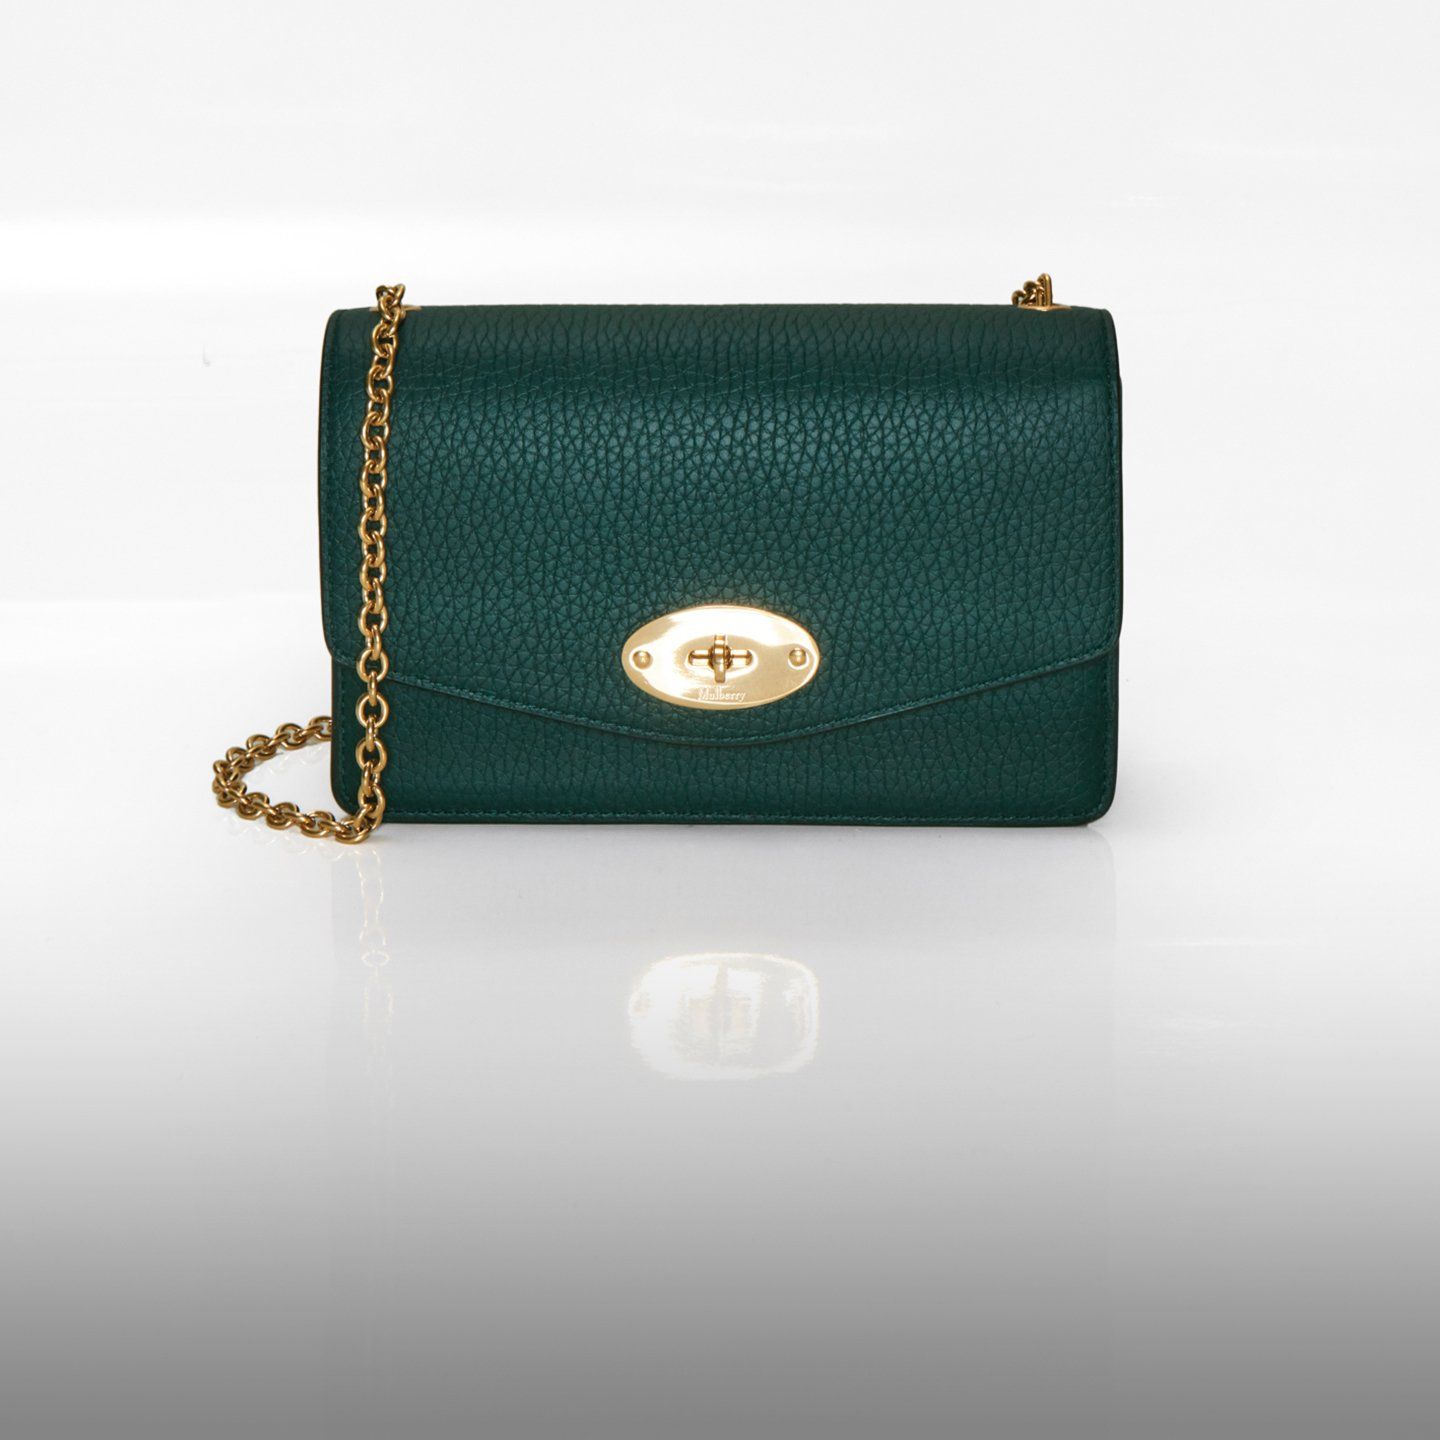 Mulberry Darley Bag in Mulberry Green